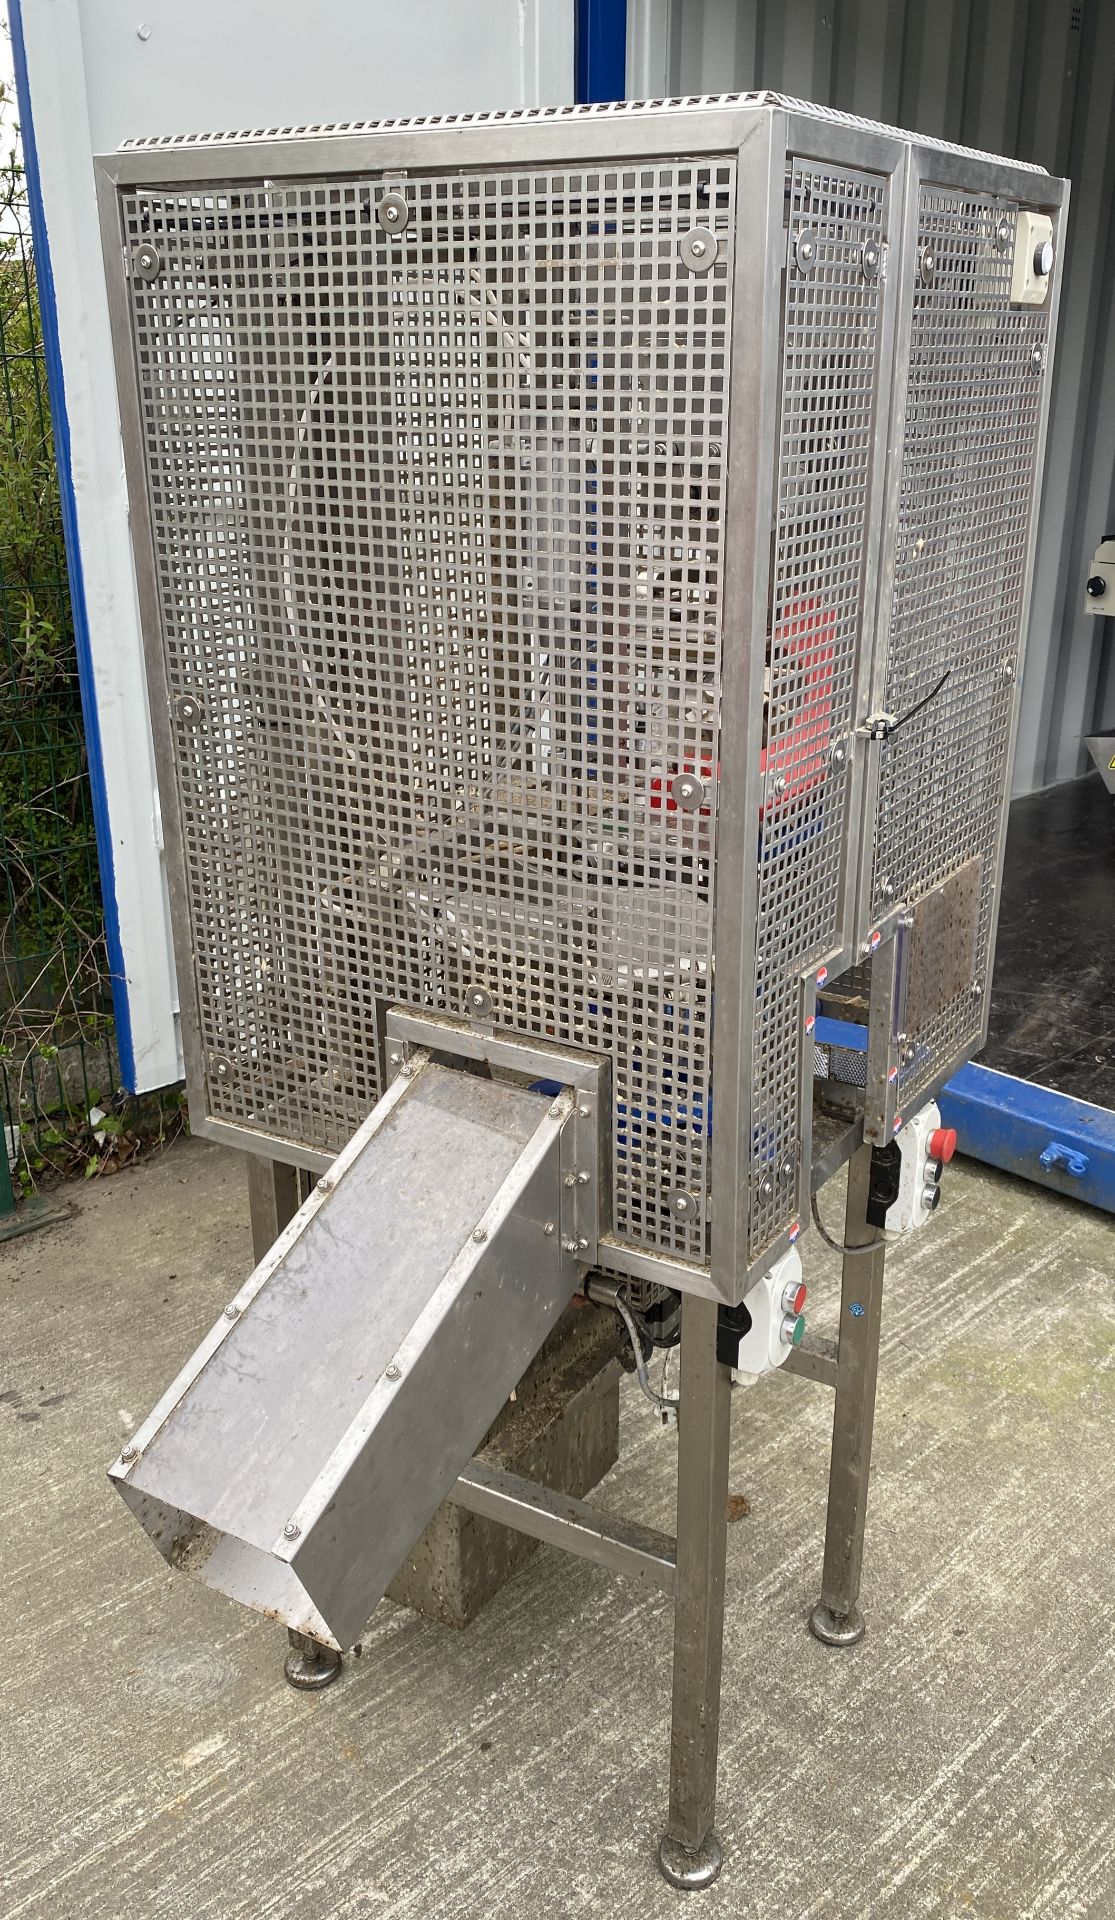 STAINLESS STEEL APPLE SPIKING MACHINE, approximately 1m x 650mm x 1.